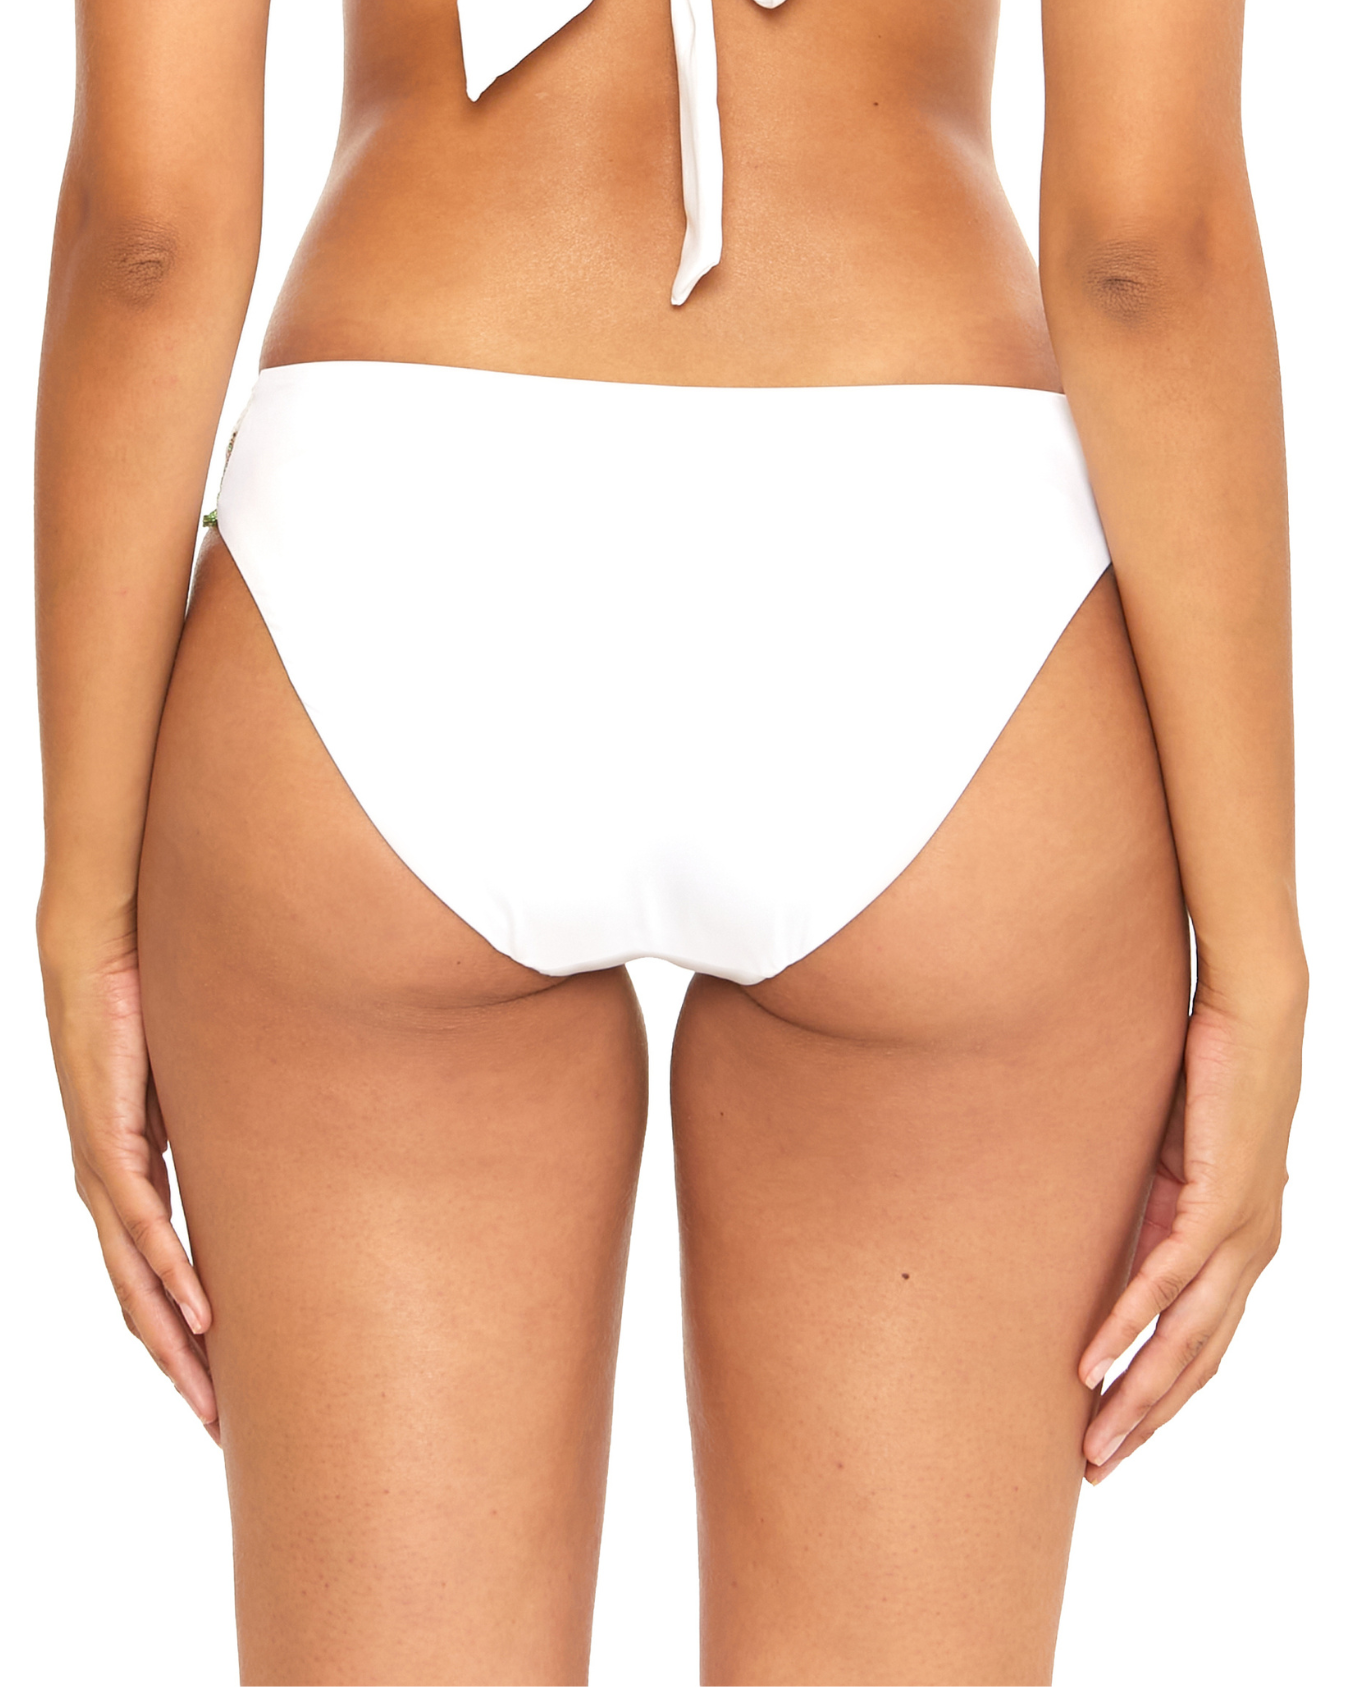 2023 Becca by Rebcca Virtue Layla American Hipster Bottom - 204337